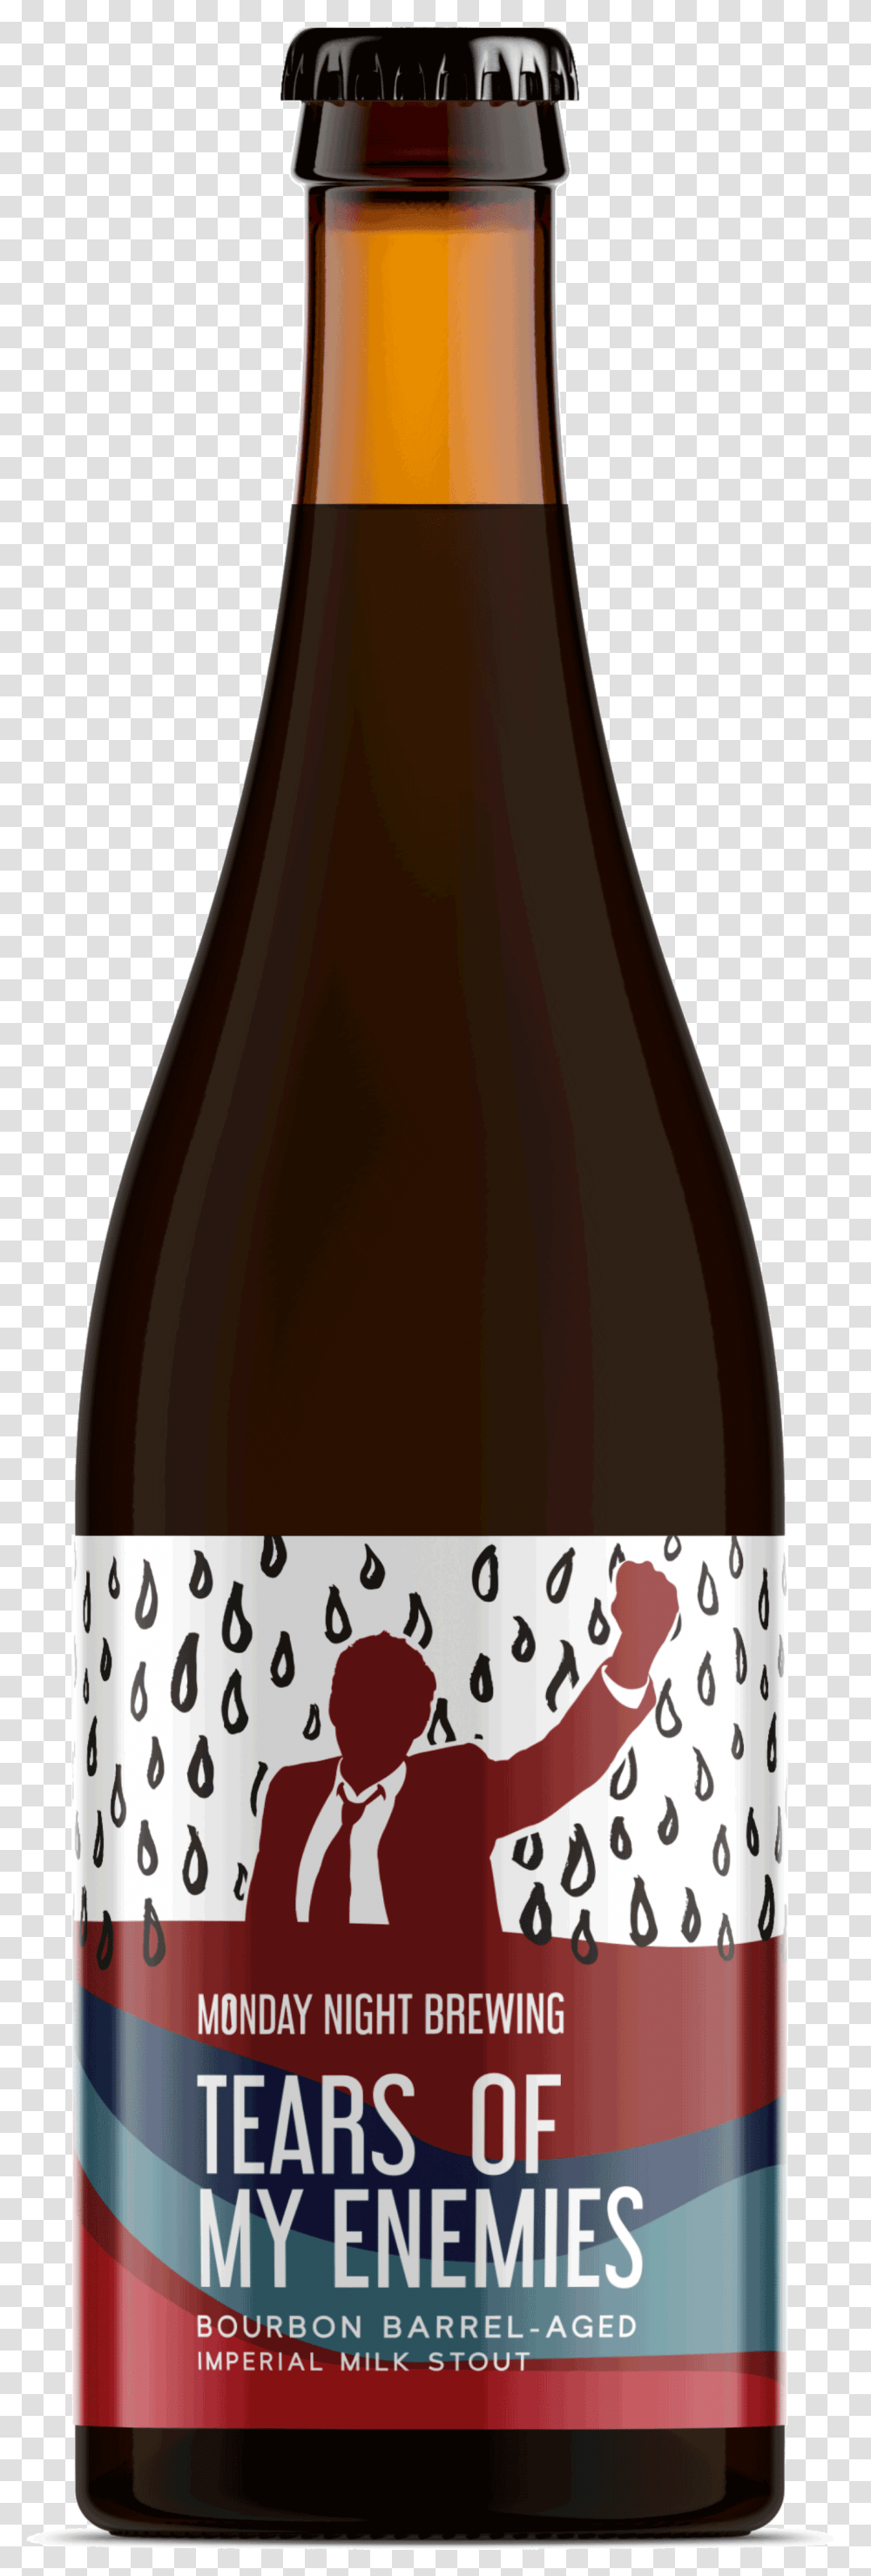 Tears Of My Enemies Monday Night Brewing, Alcohol, Beverage, Drink, Label Transparent Png